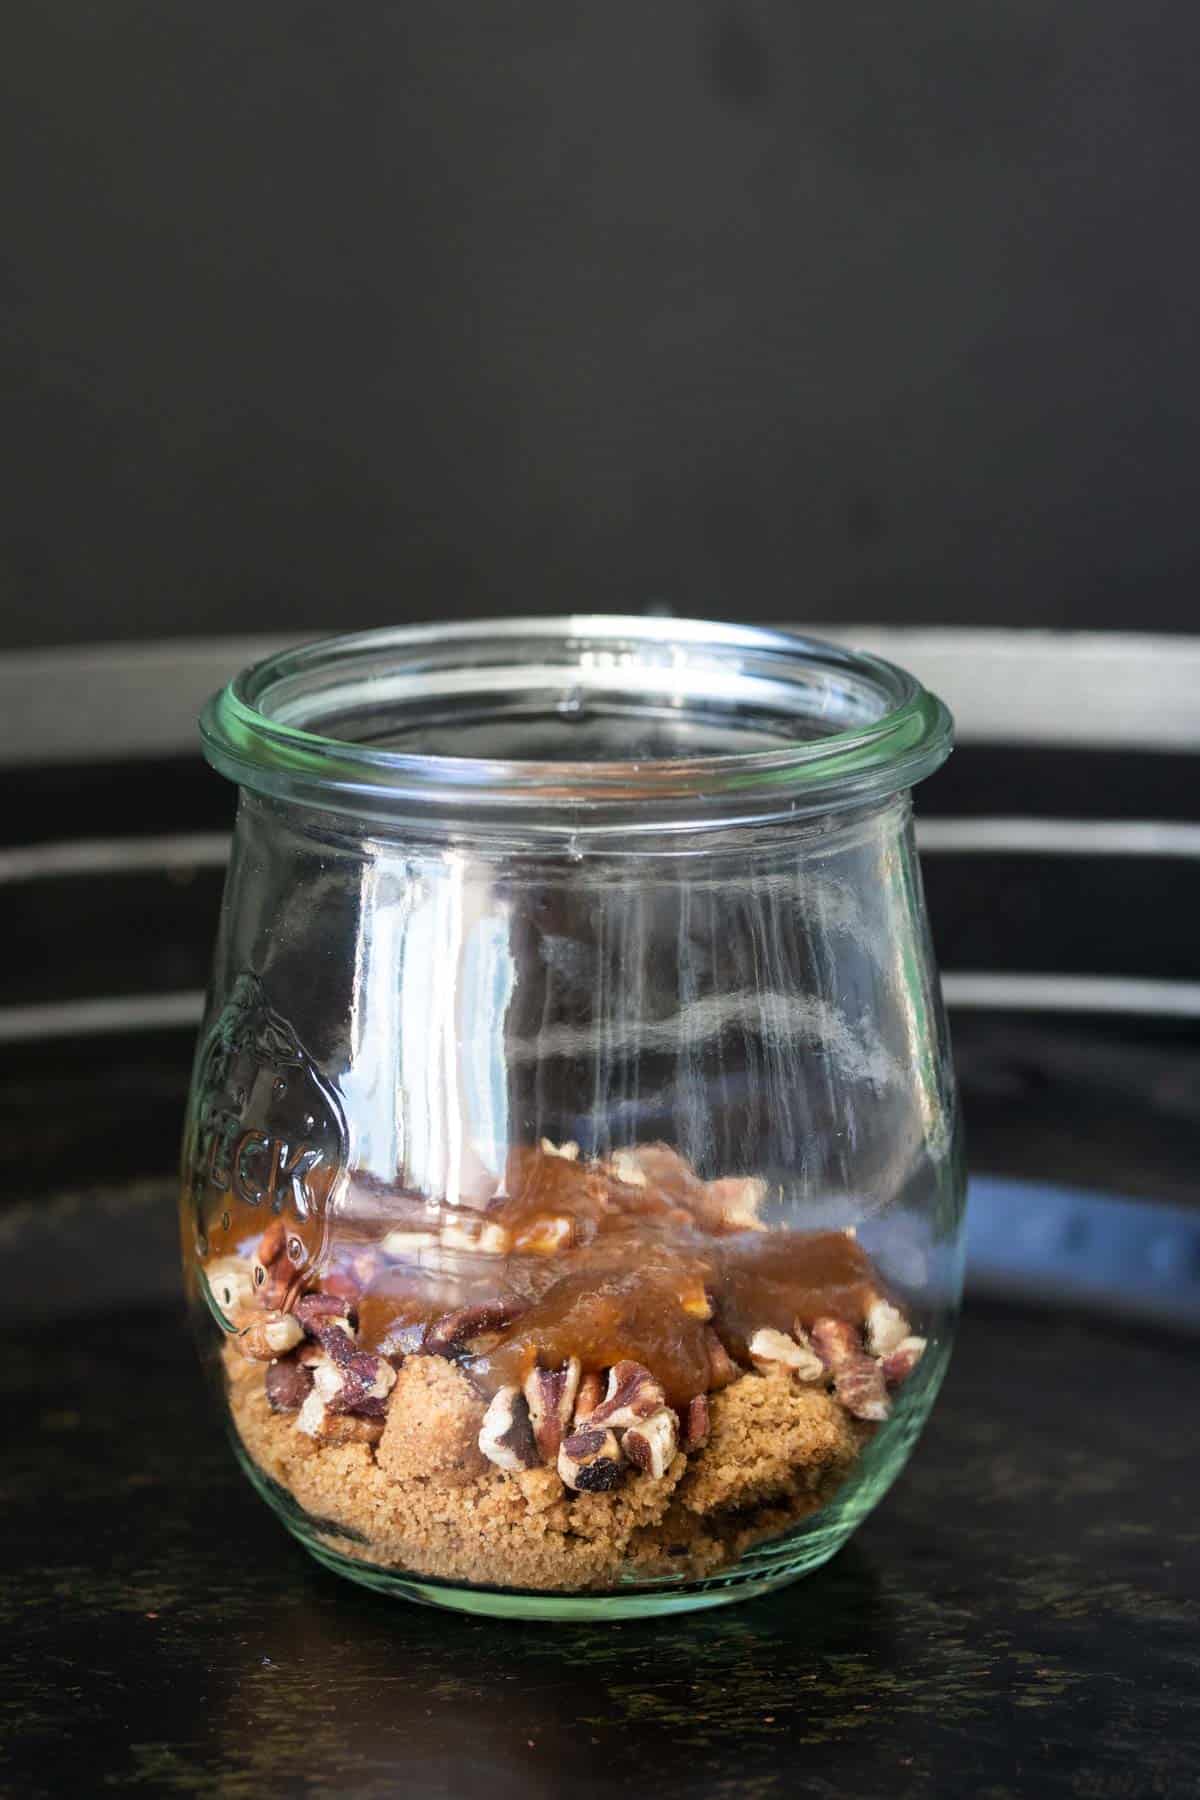 A glass jar layered with crushed cookies, pecans and caramel.